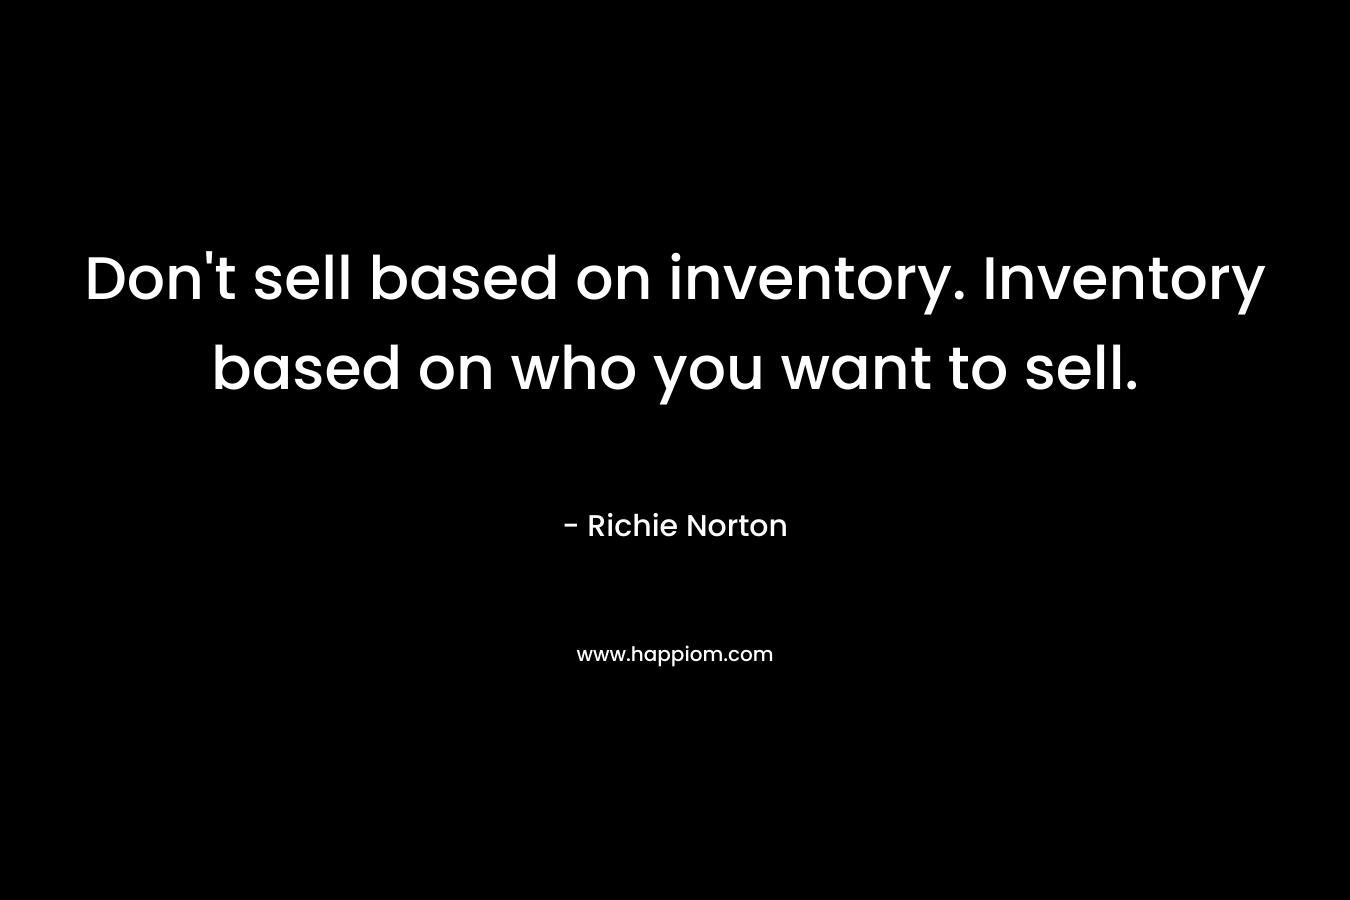 Don't sell based on inventory. Inventory based on who you want to sell.